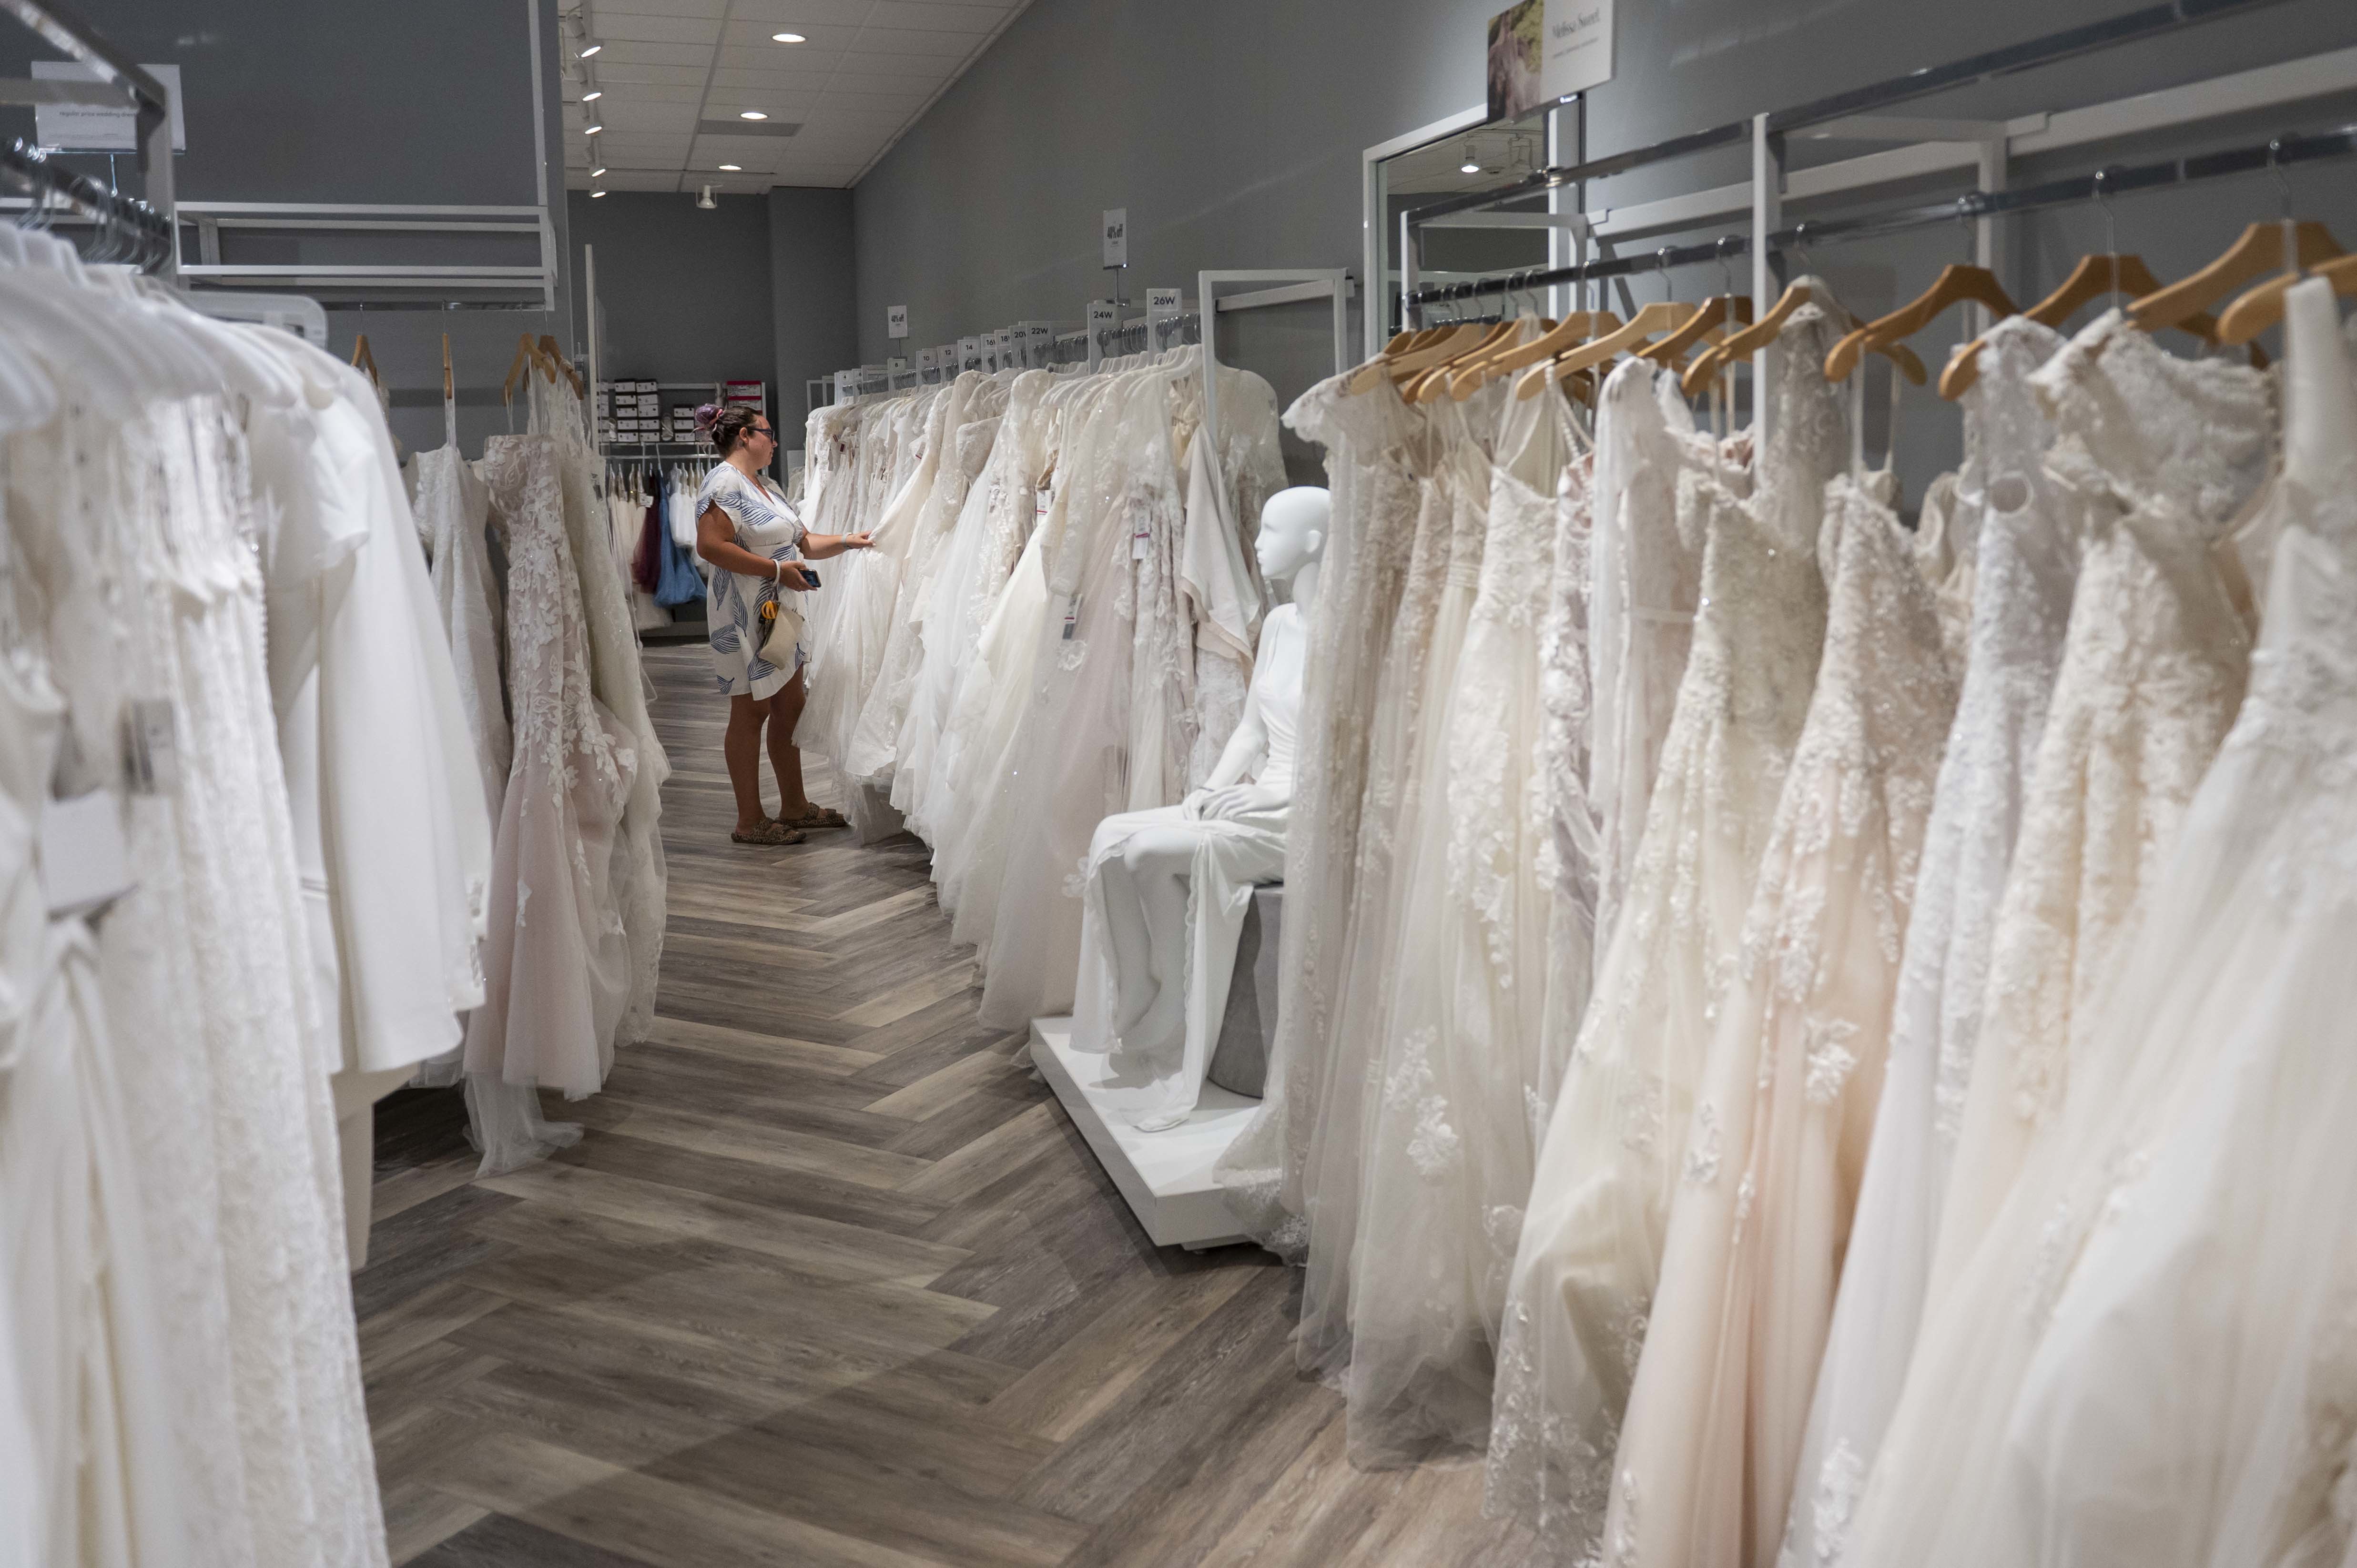 David's Bridal is leaving their Conshohocken headquarters after